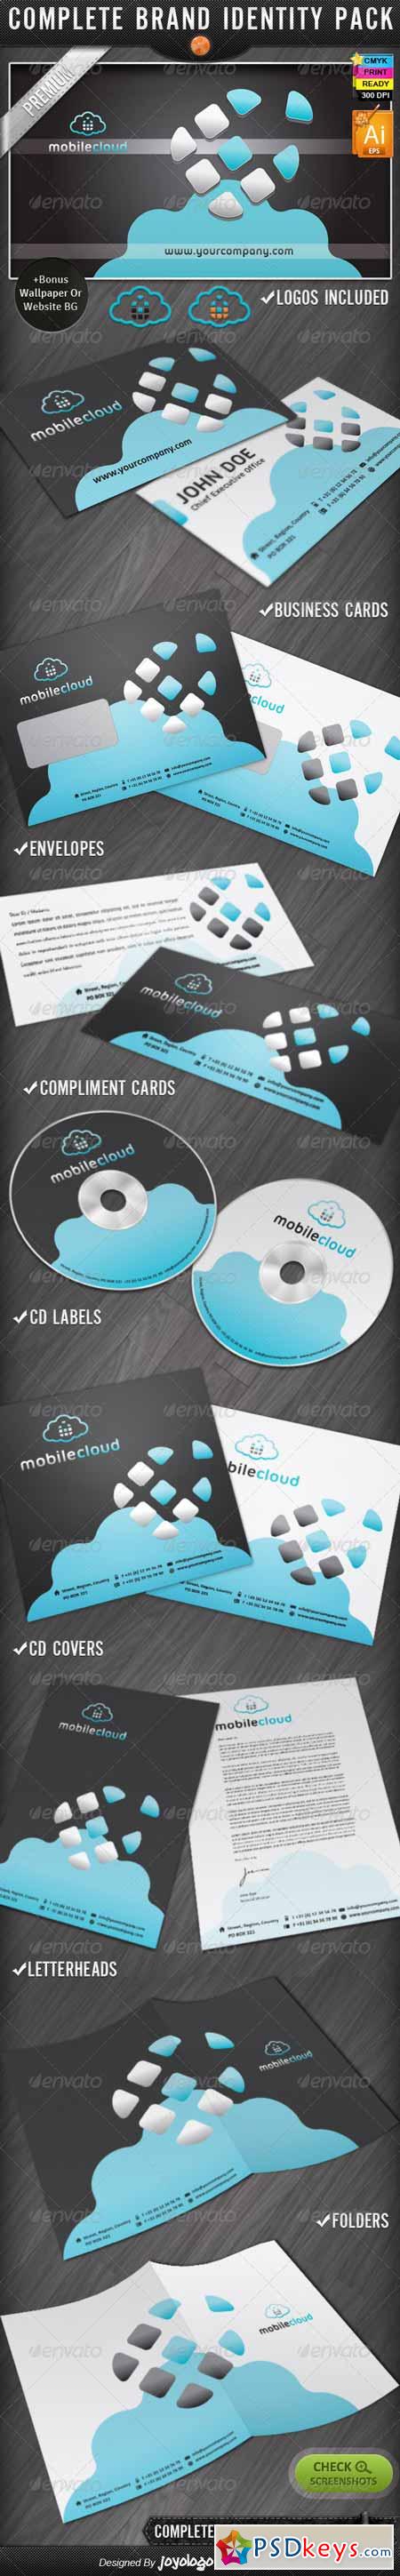 Phone Cloud Mobile IT Business Identity Designs 2444995